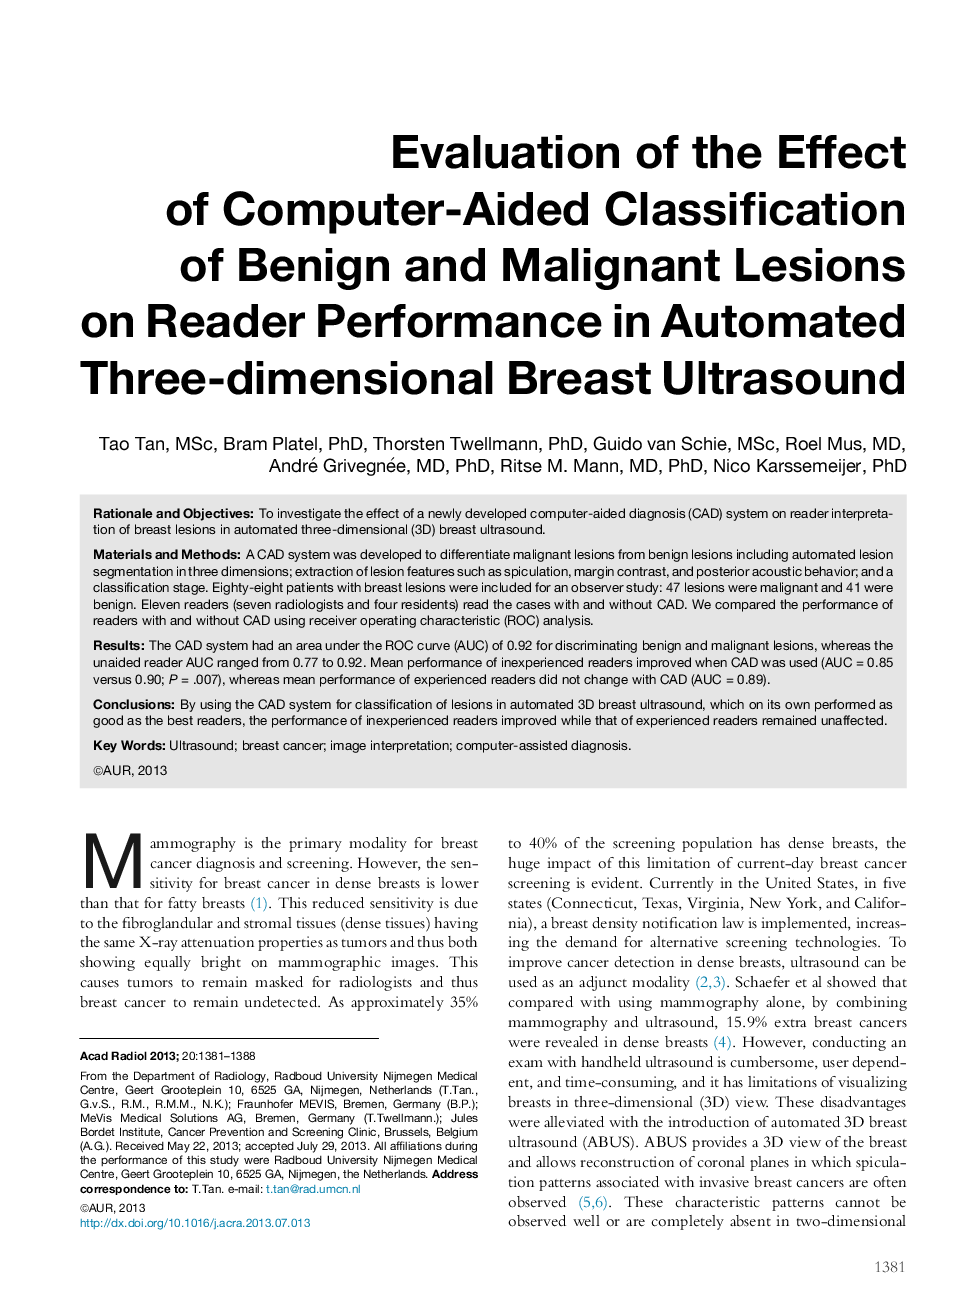 Evaluation of the Effect ofÂ Computer-Aided Classification ofÂ Benign and Malignant Lesions onÂ Reader Performance in Automated Three-dimensional Breast Ultrasound